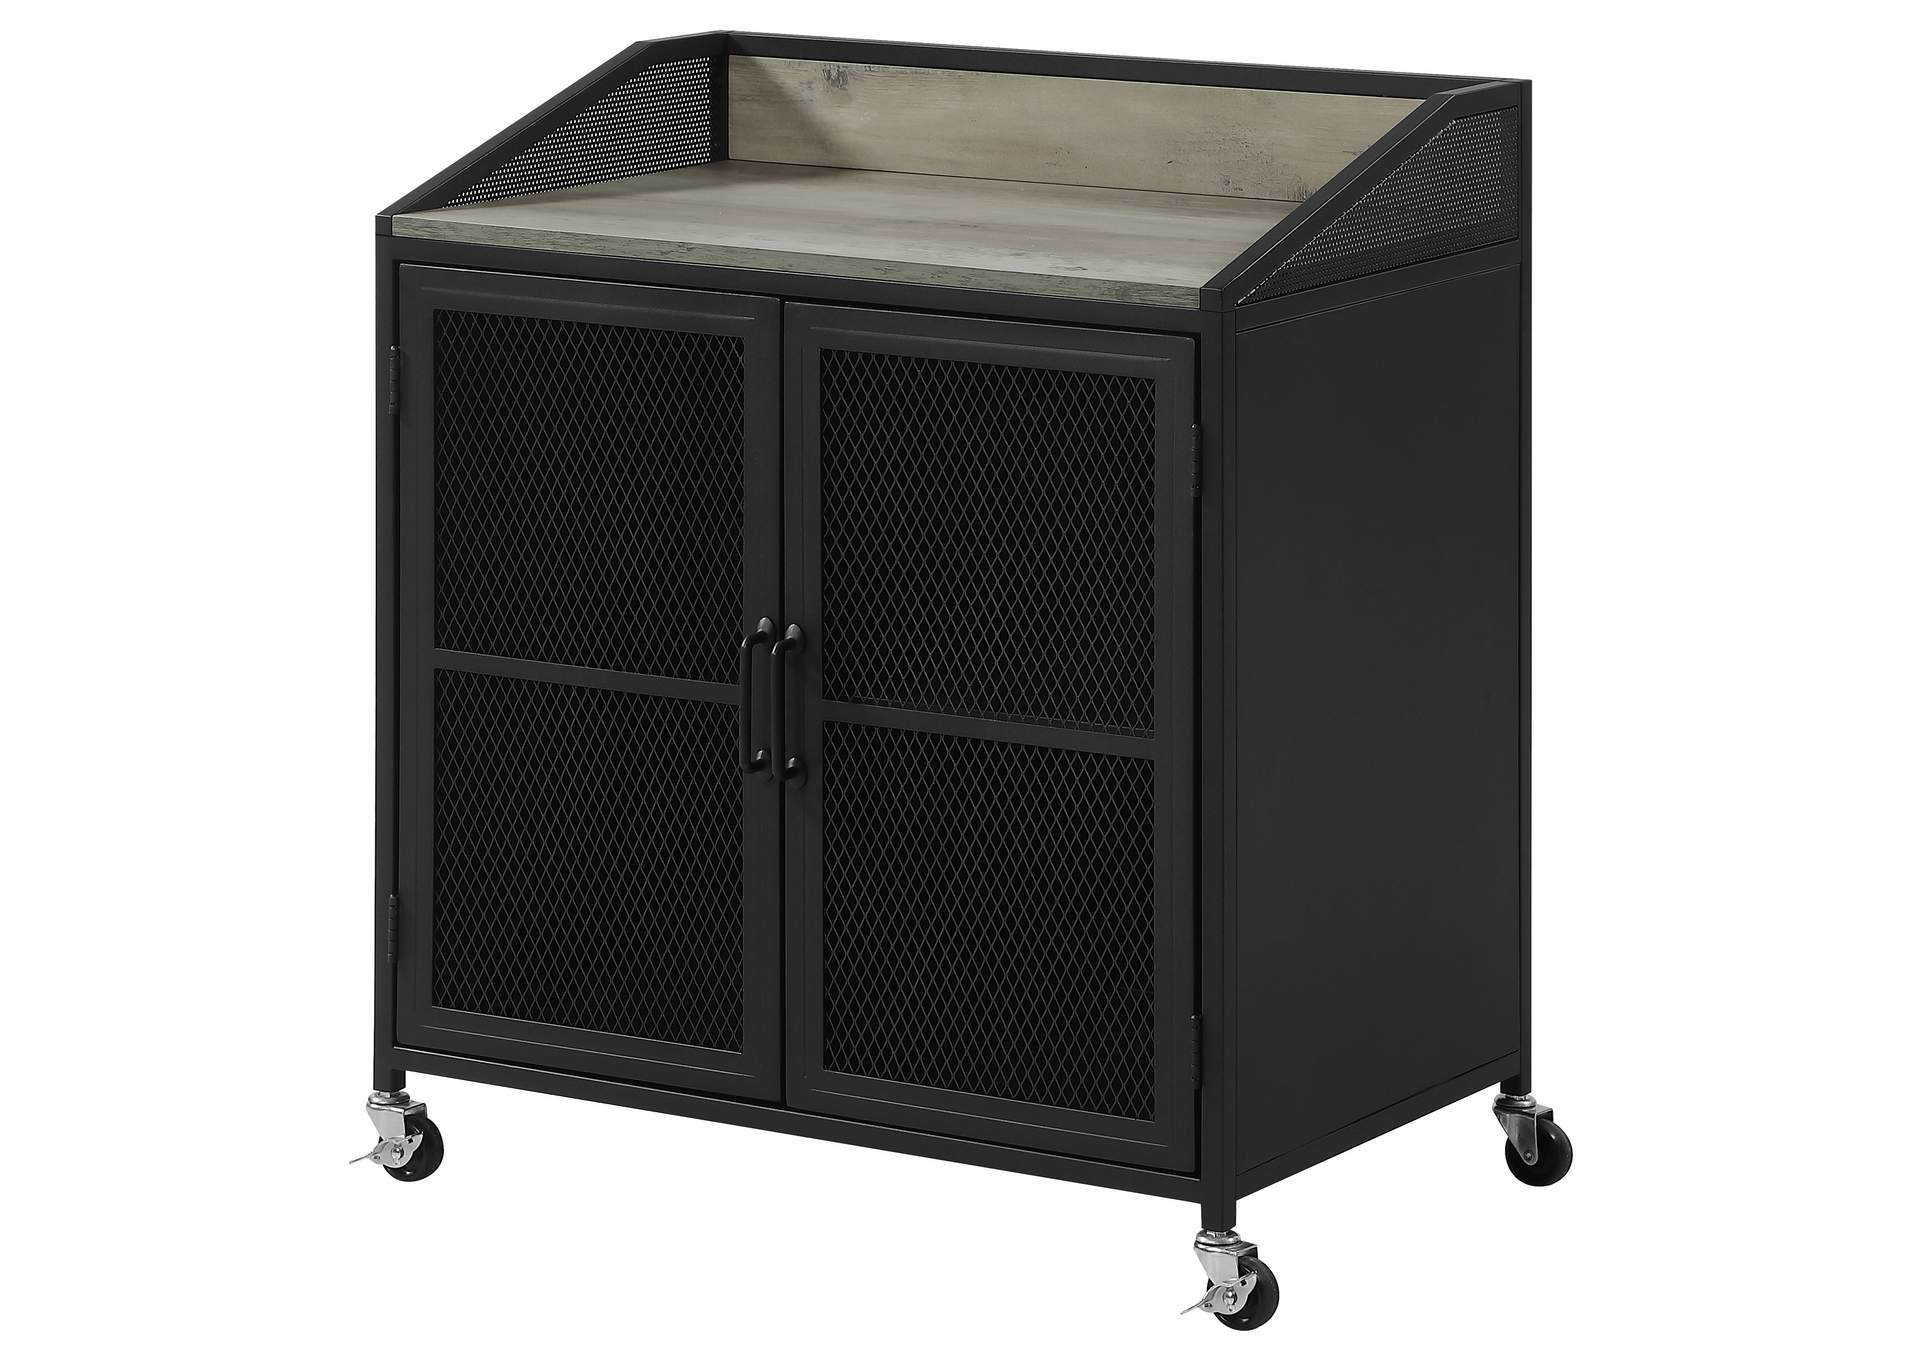 Arlette Wine Cabinet with Wire Mesh Doors Grey Wash and Sandy Black,Coaster Furniture